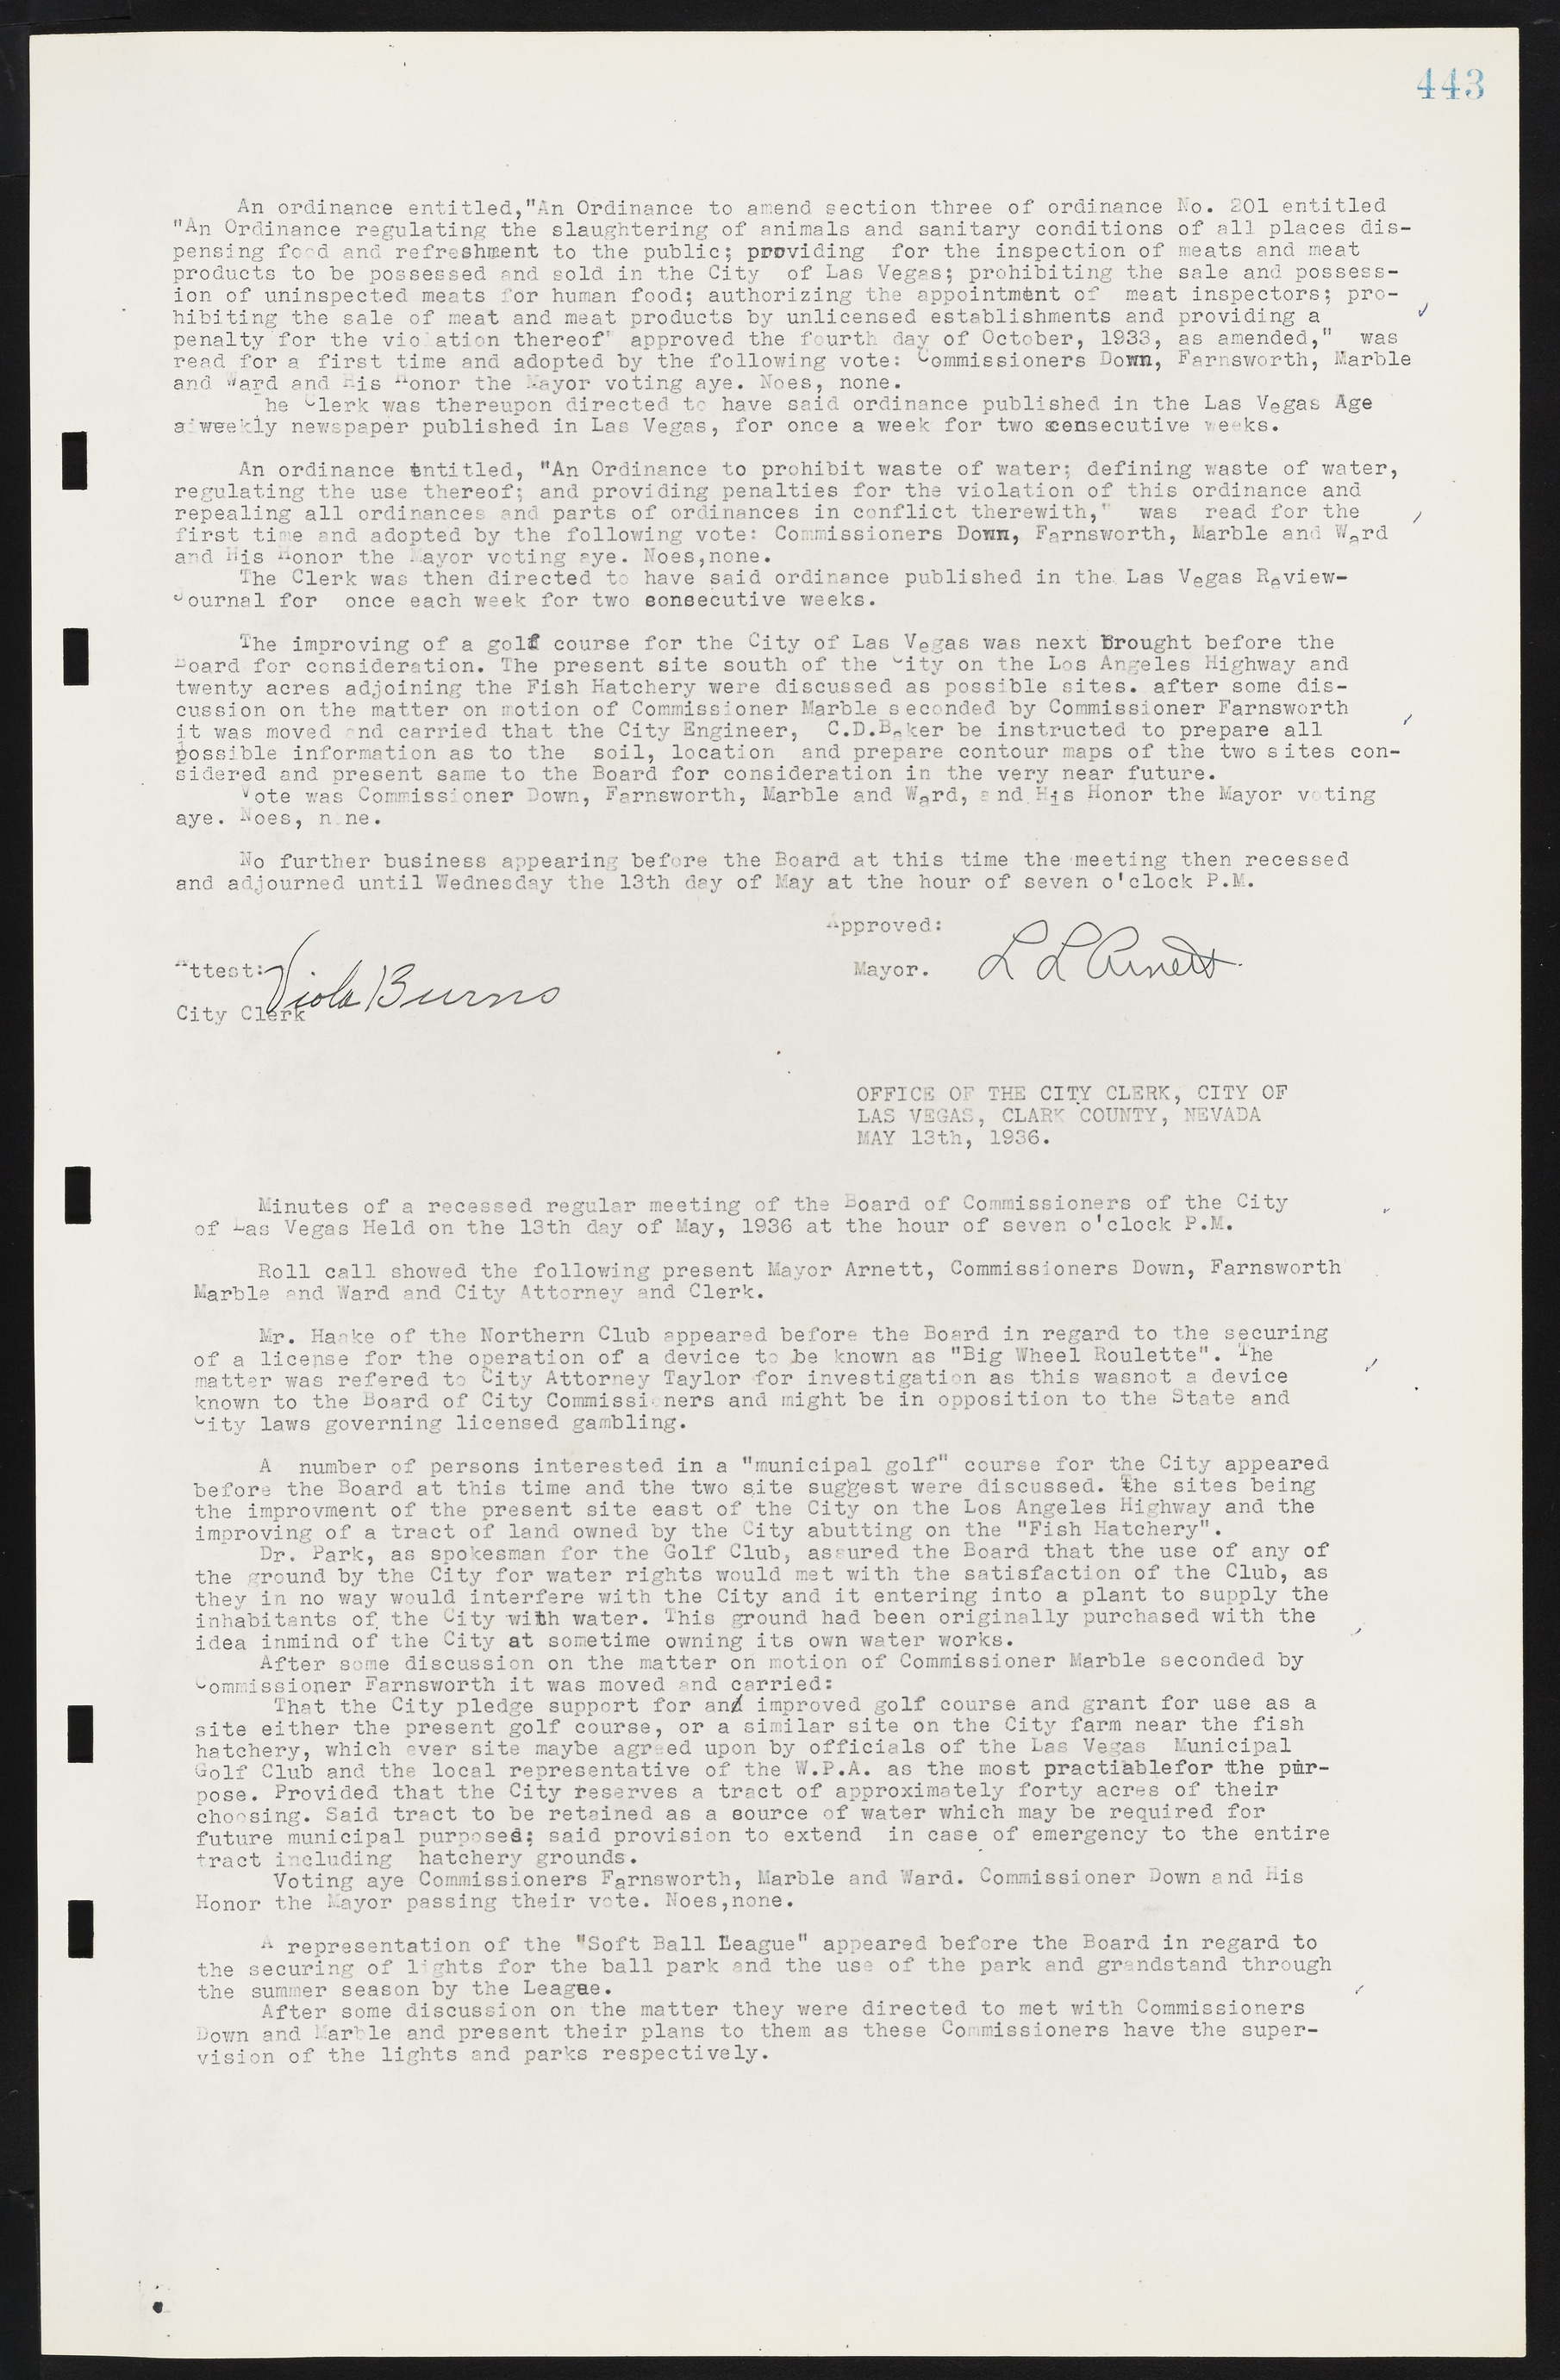 Las Vegas City Commission Minutes, May 14, 1929 to February 11, 1937, lvc000003-450